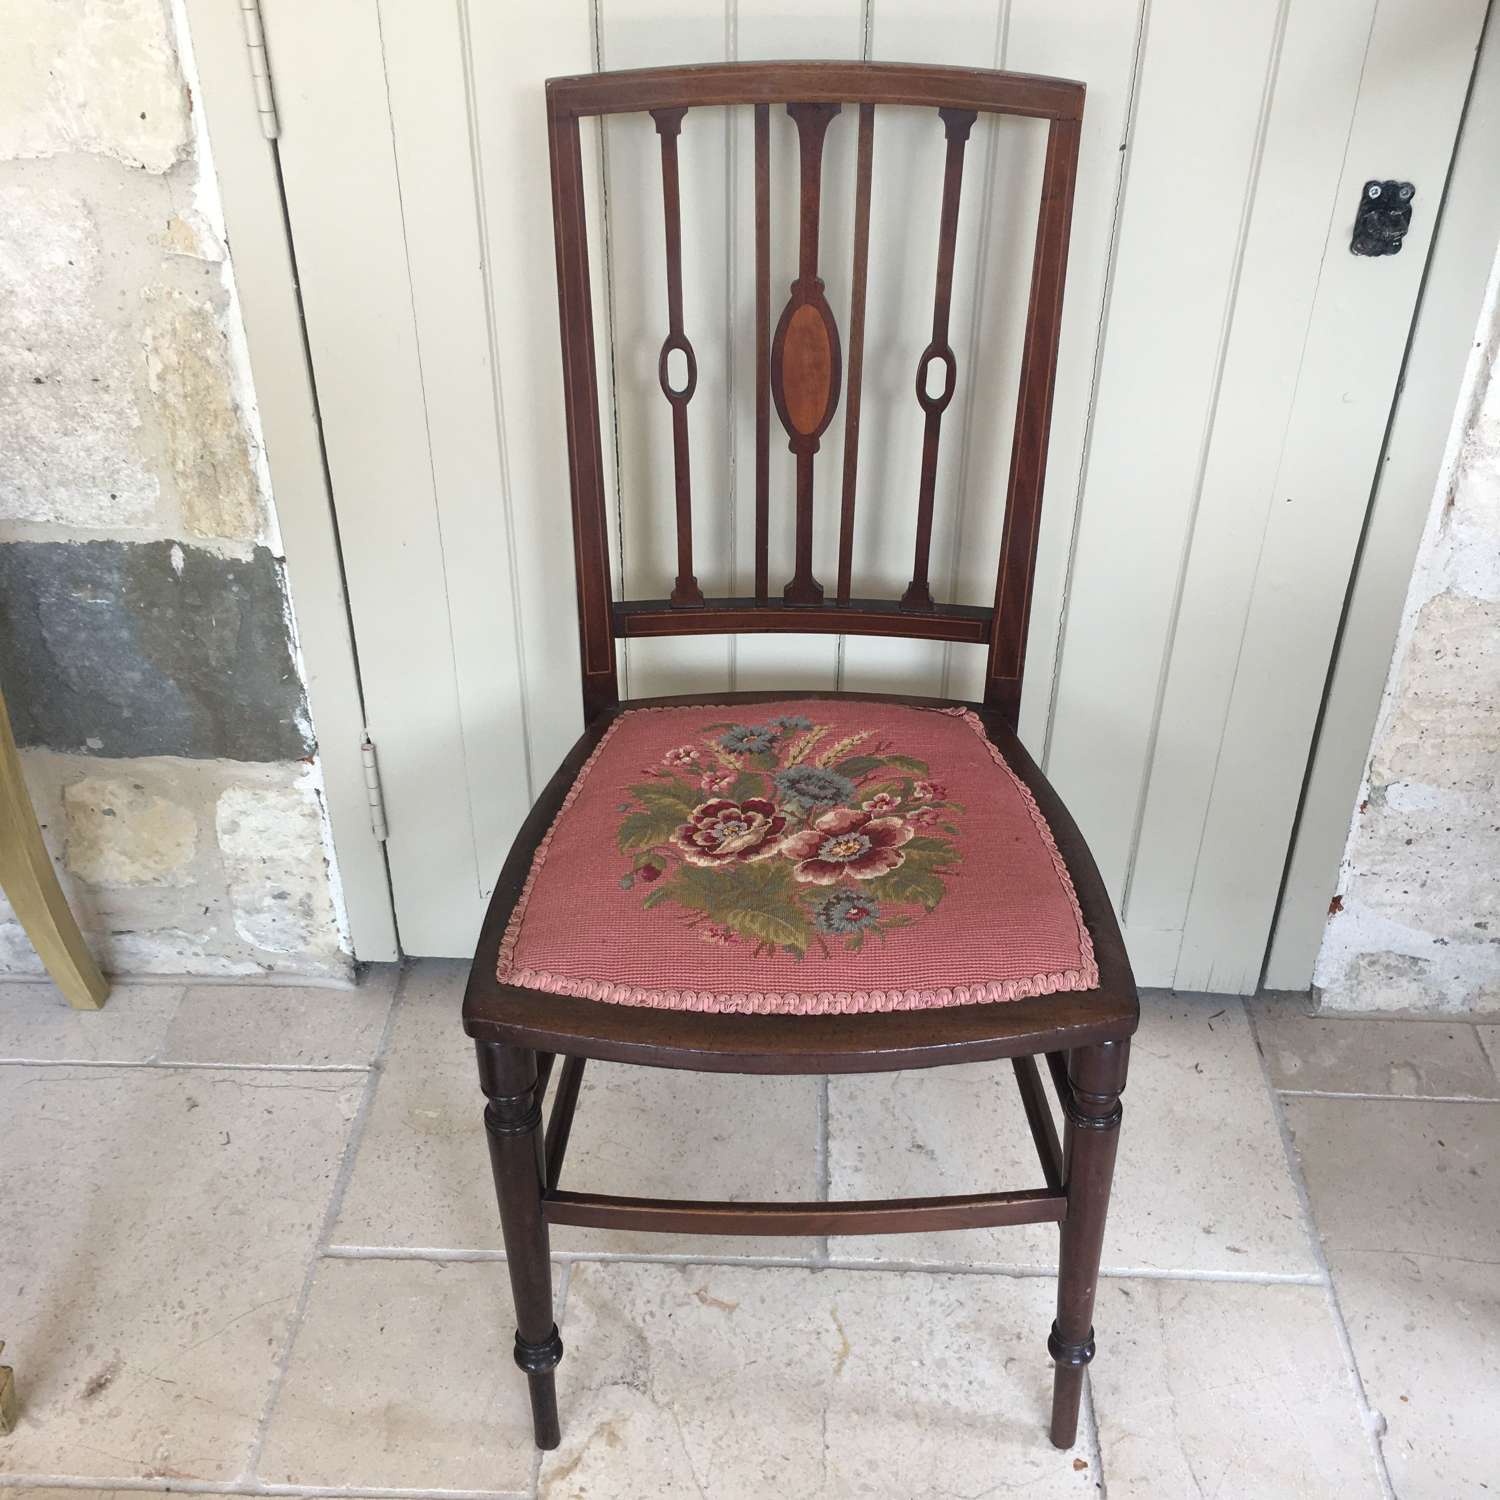 Edwardian inlaid chair with tapestry seat